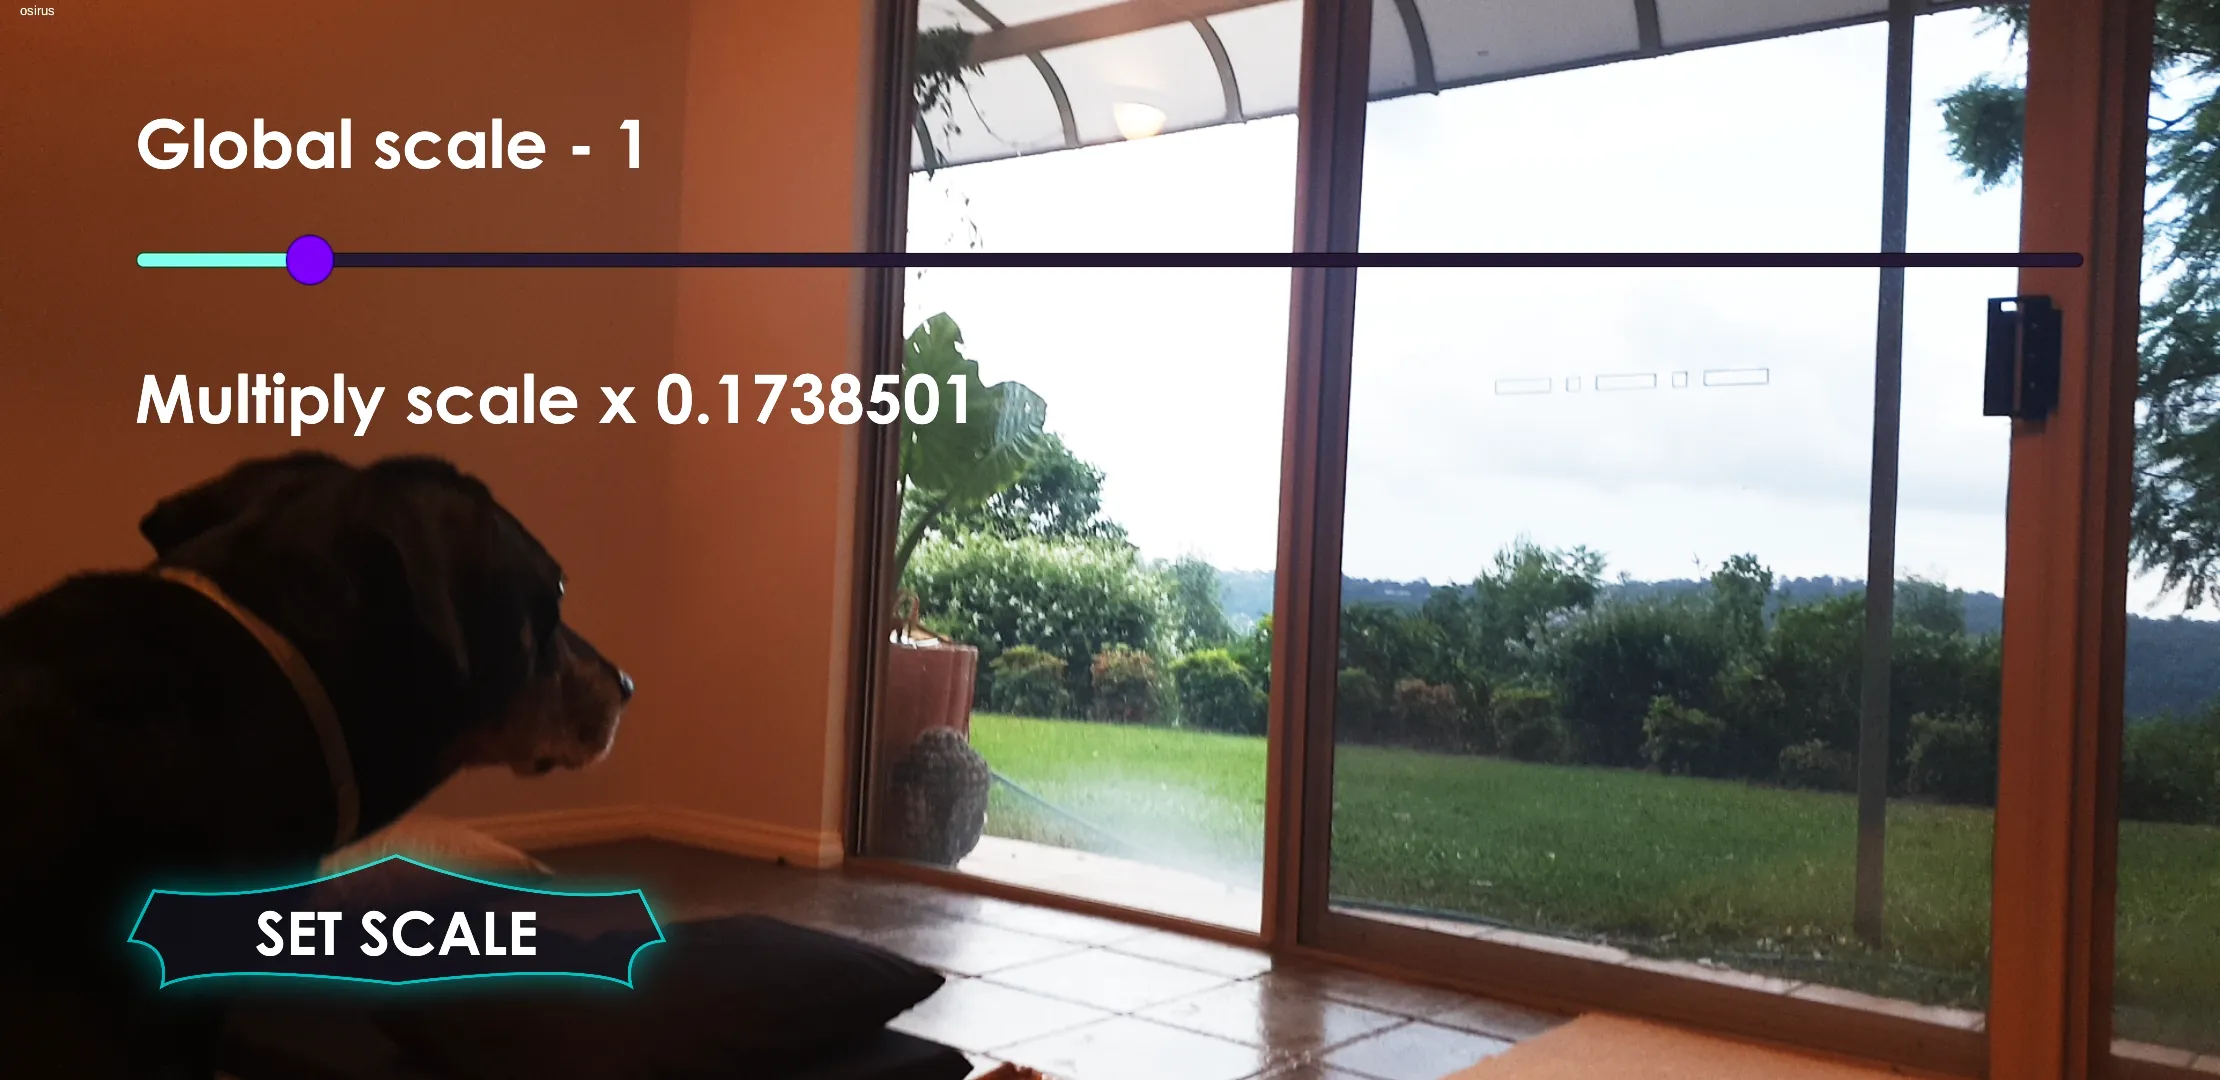 How to Play AR TCG. A person and a dog in a living room using augmented reality.